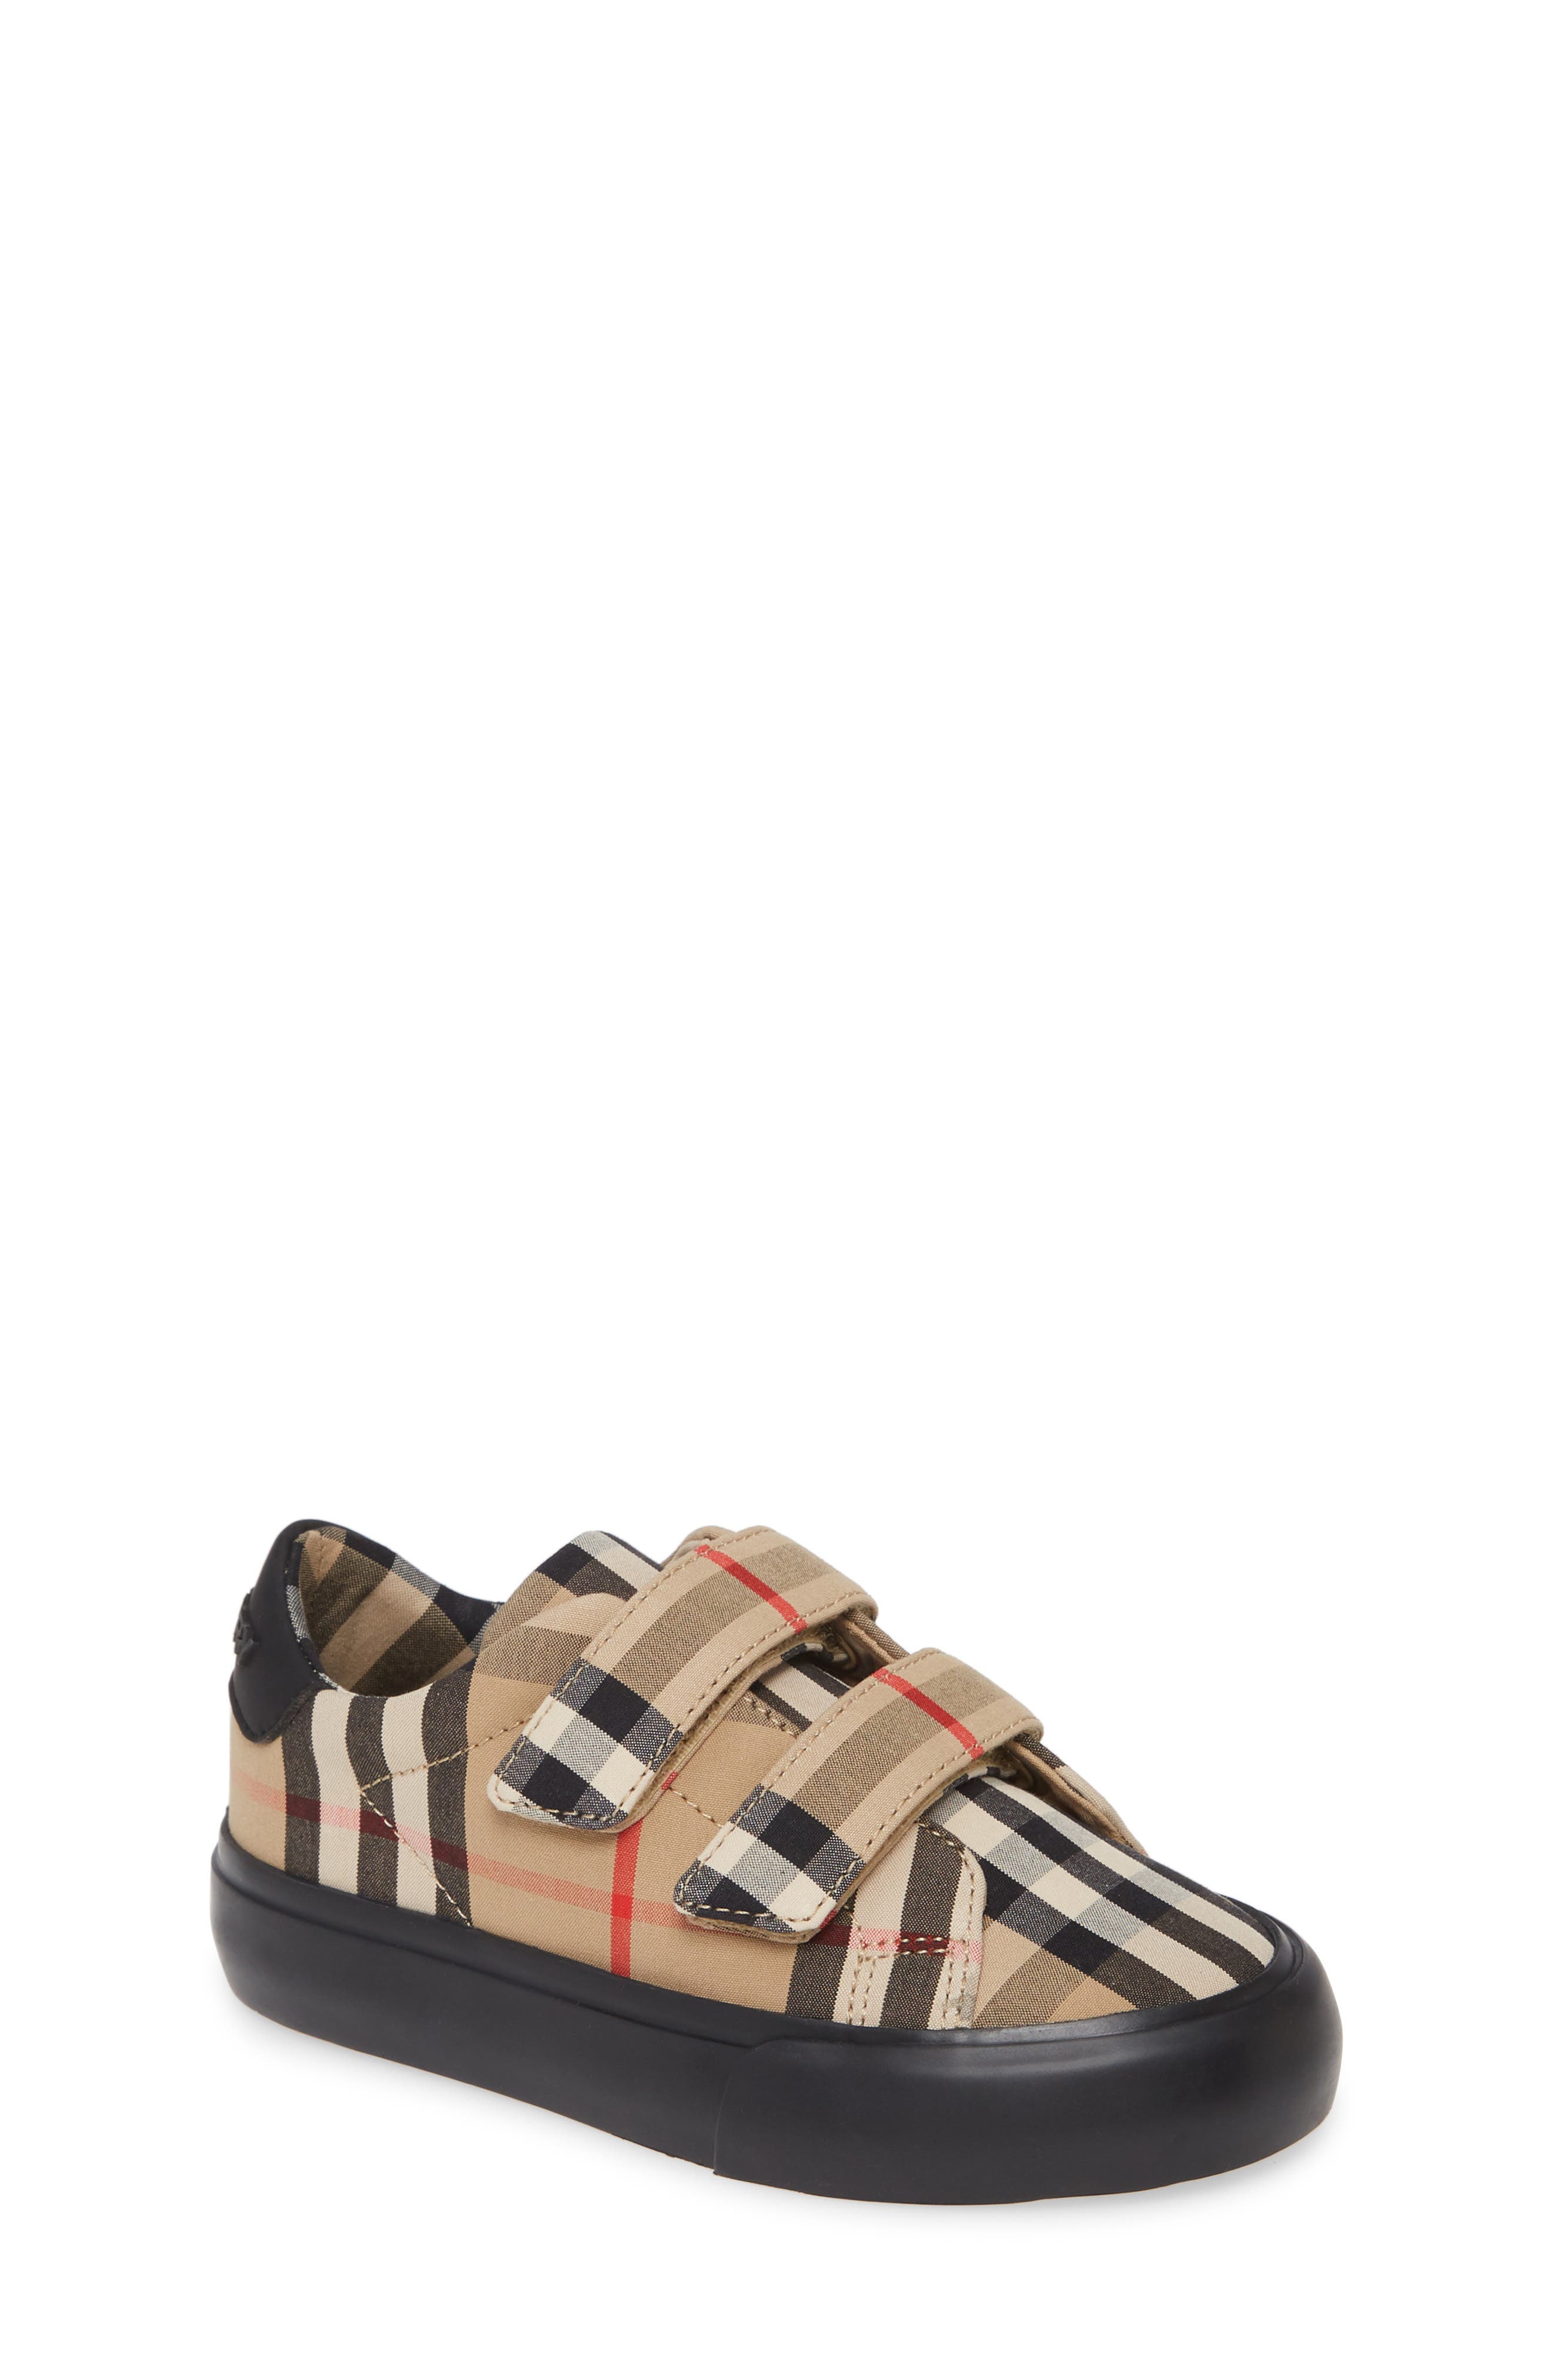 Burberry Kids Shoes Sale Deals, 41% OFF | www.angloamericancentre.it